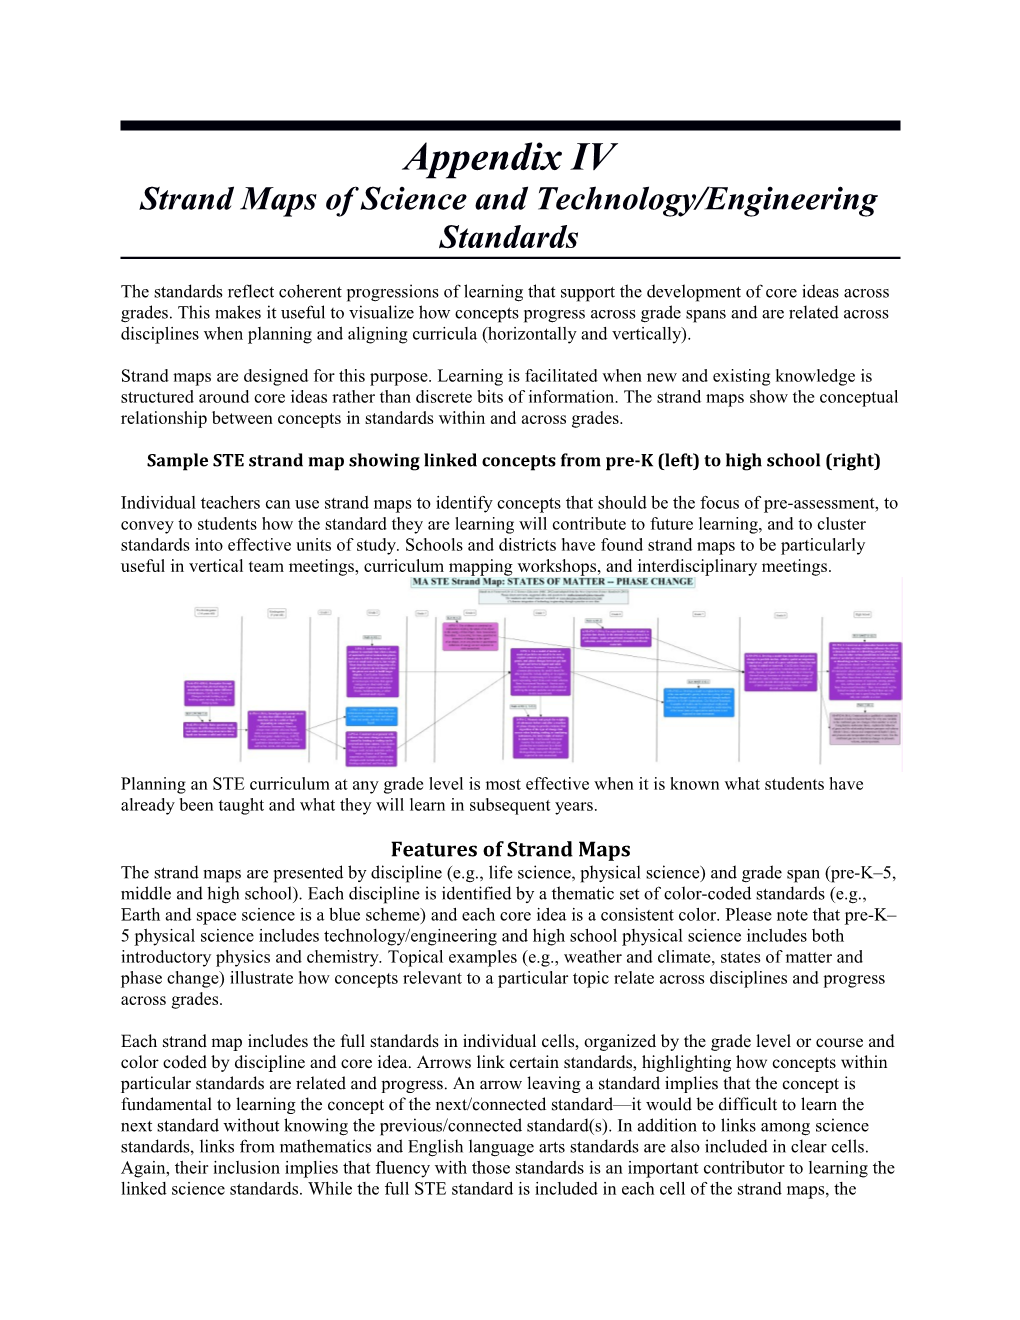 Appendix IV: Strand Maps of Science and Technology/Engineering Standards